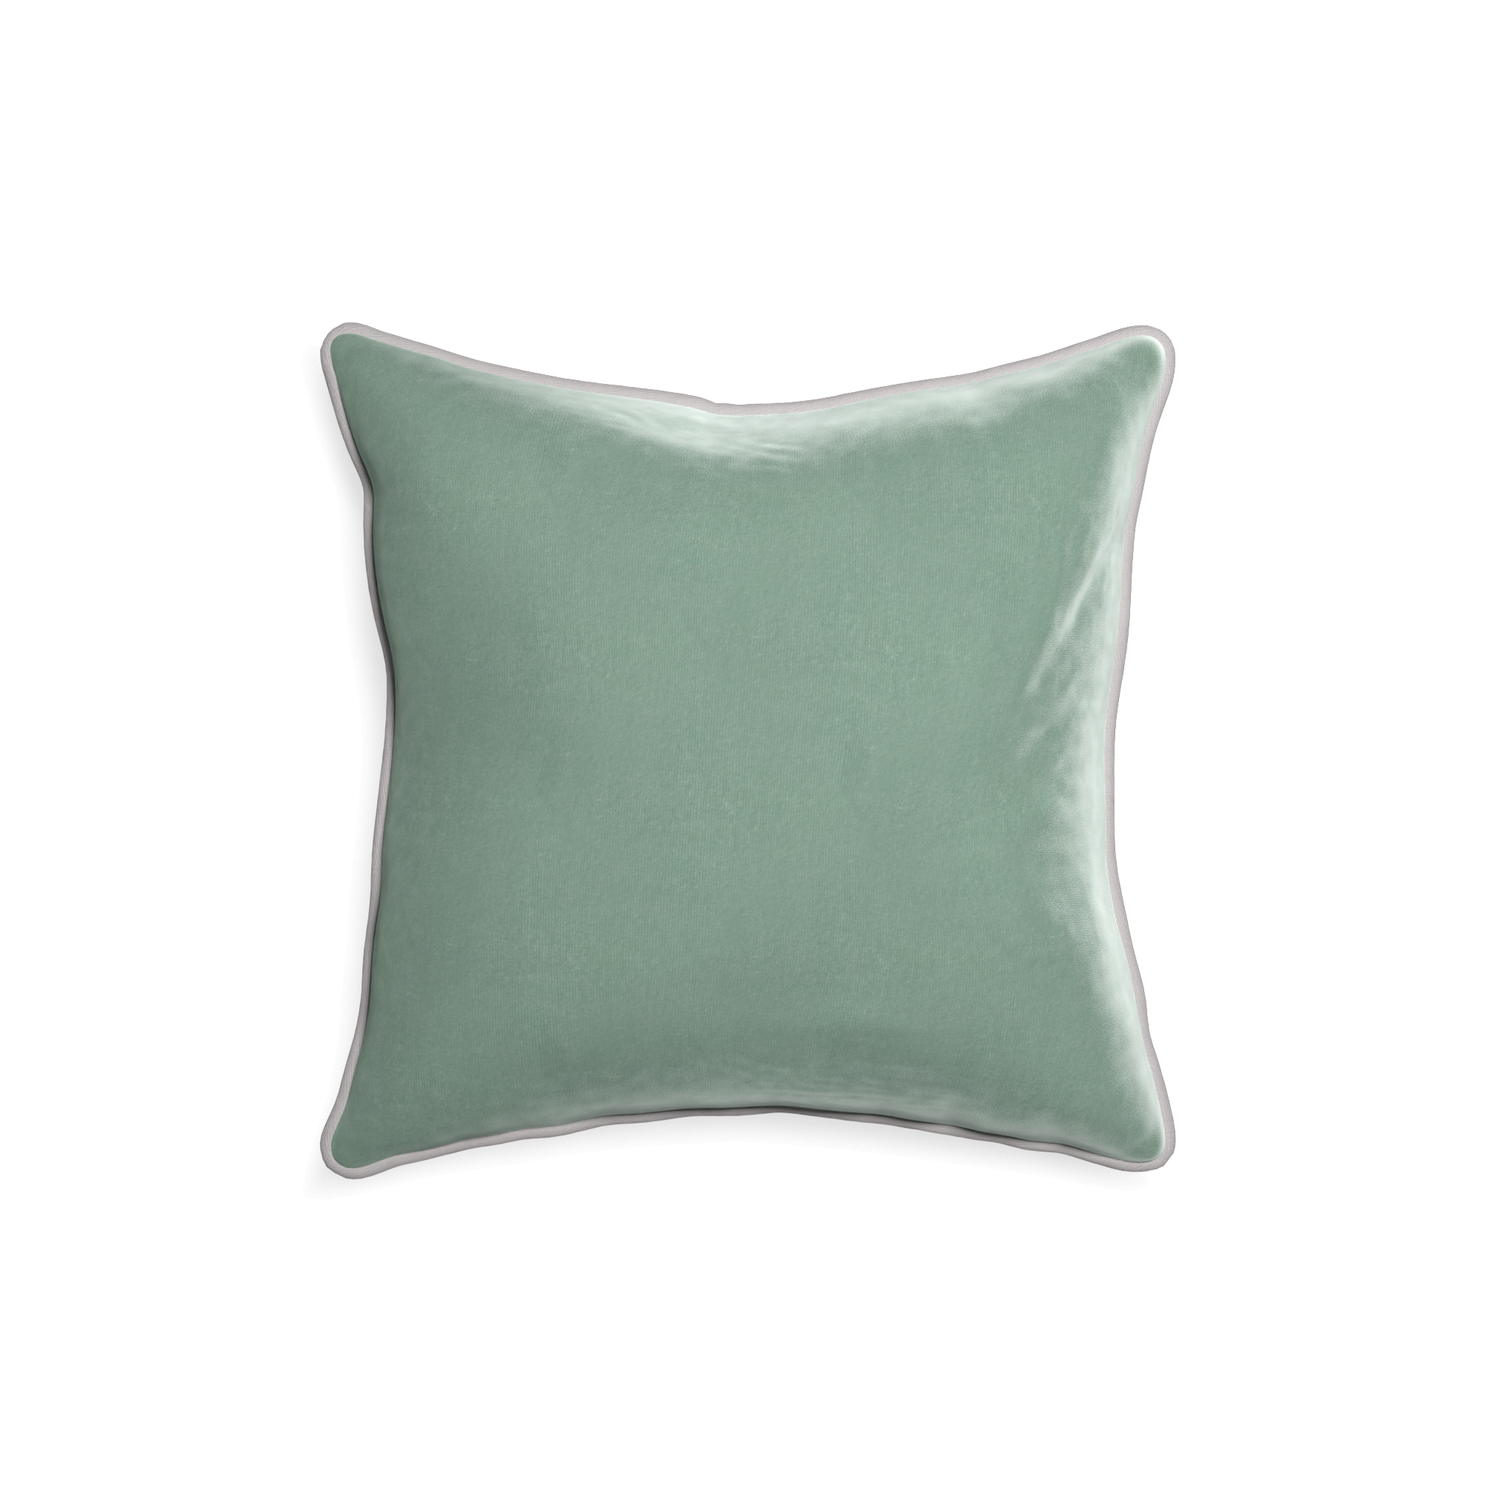 square blue green velvet pillow with gray piping